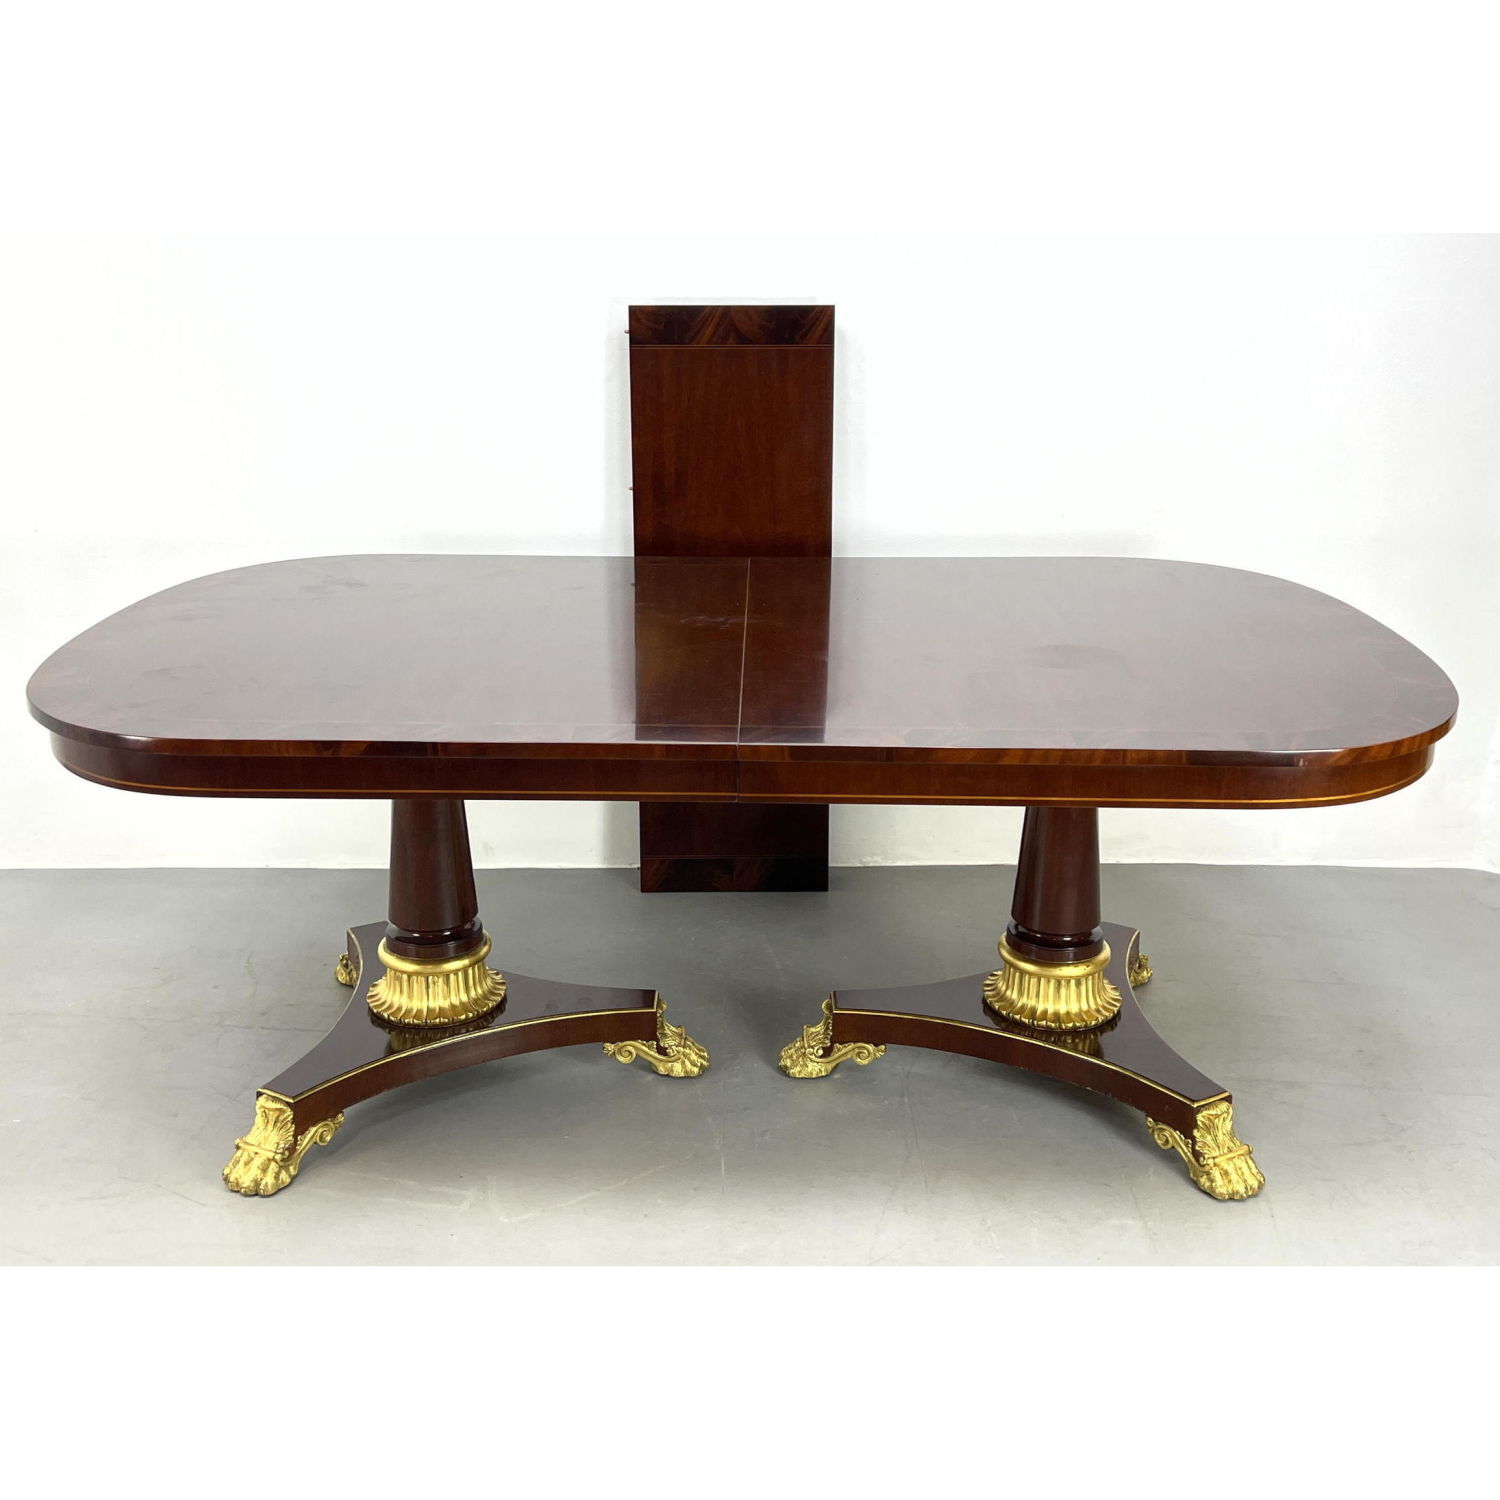 KINDEL Classic Form Dining Table.